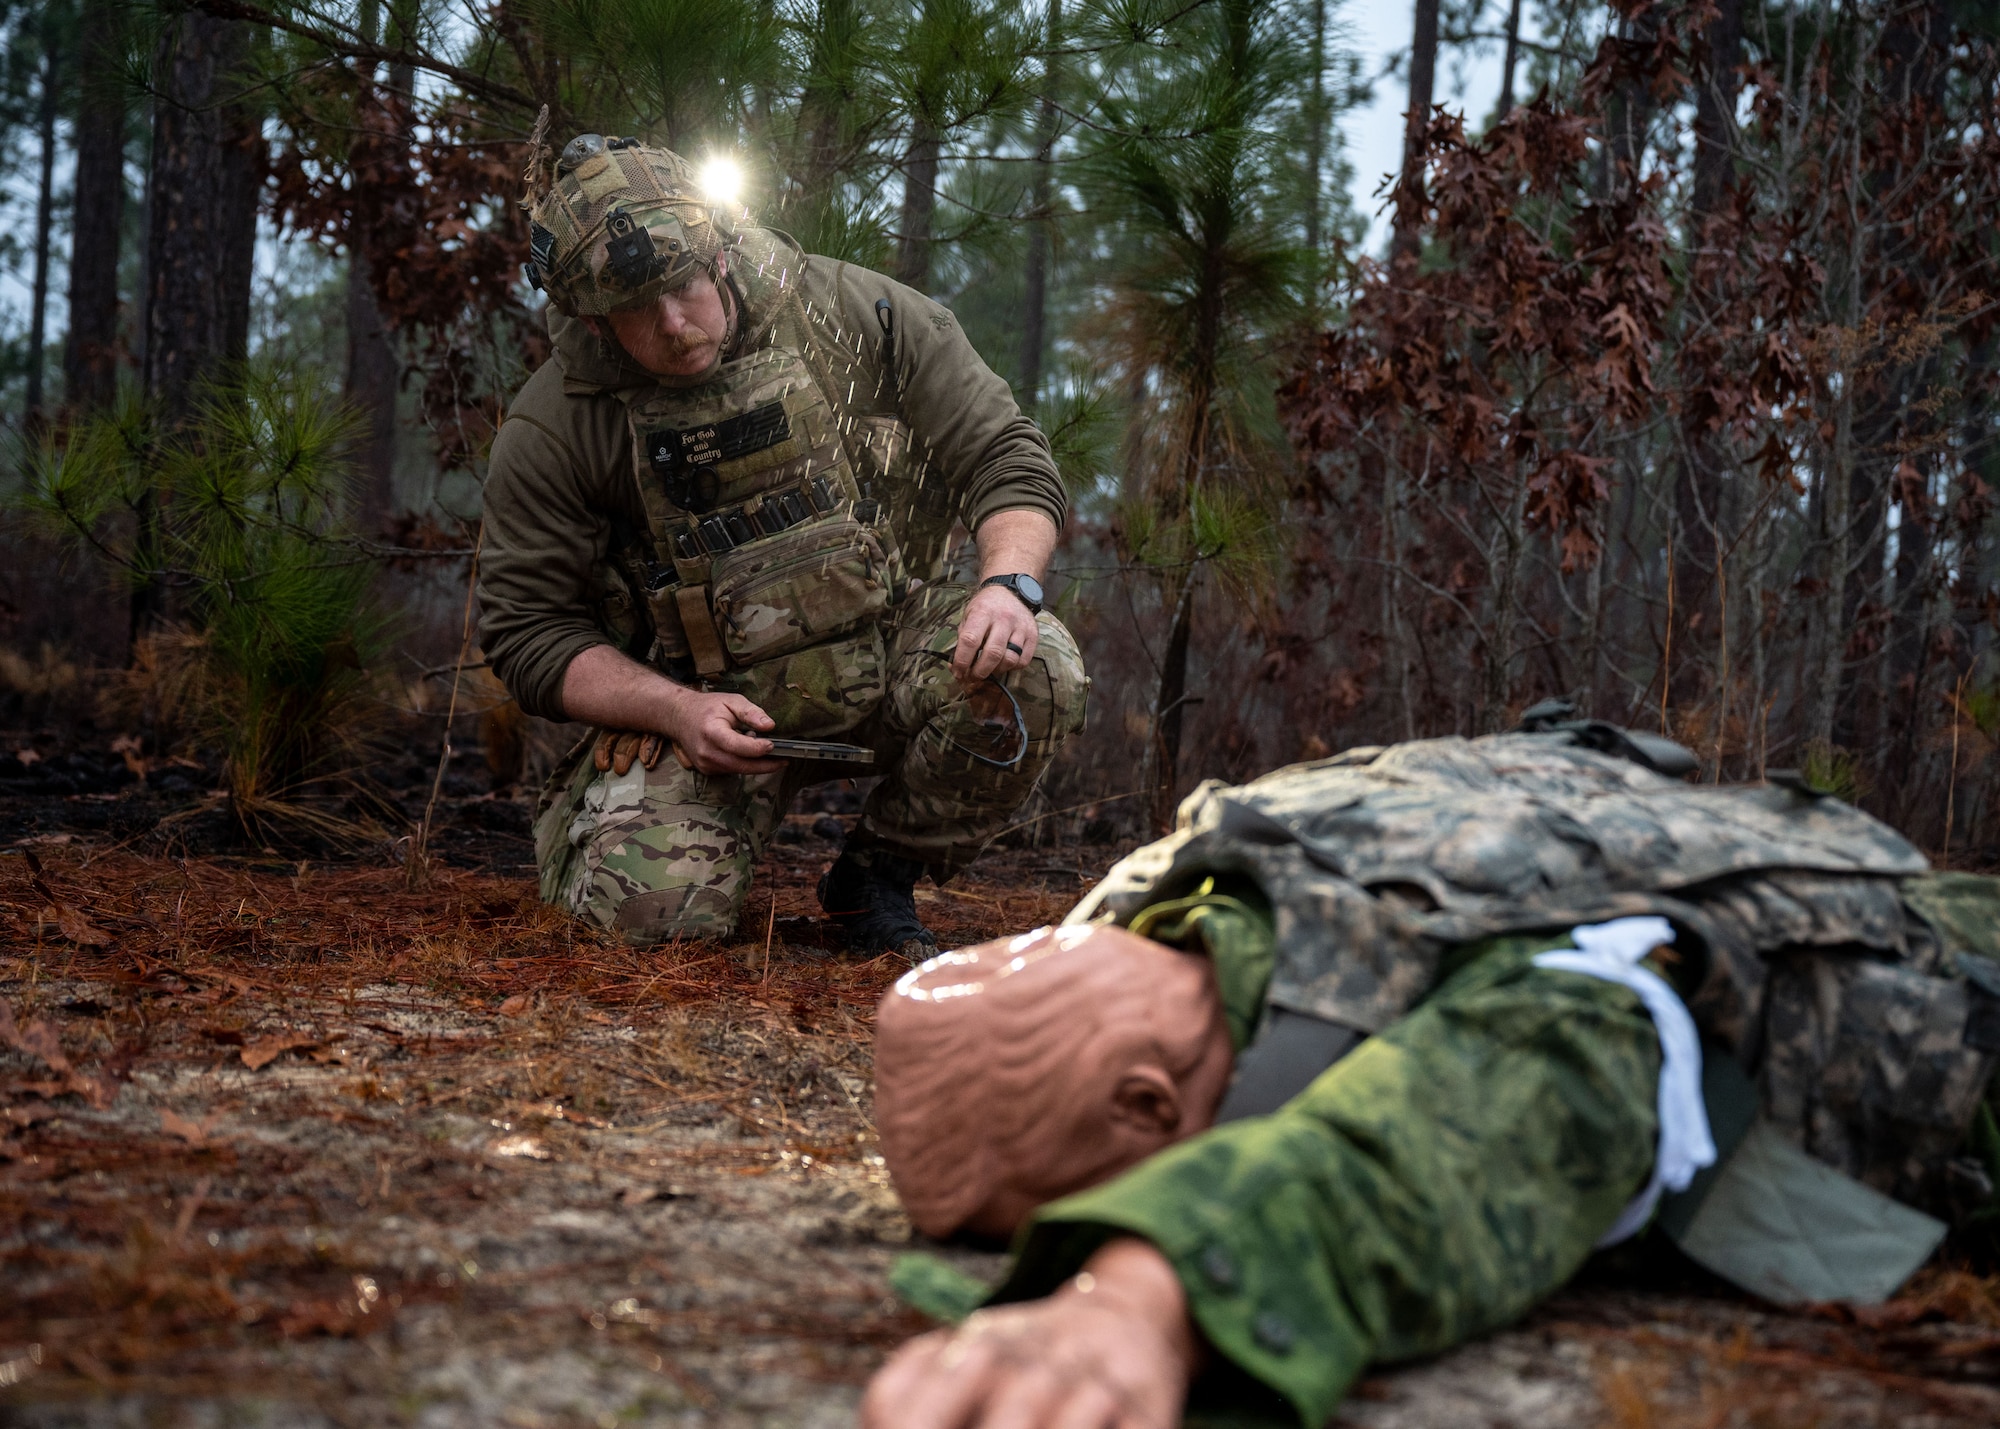 A man looks at a training mannequin laying in the dirt.